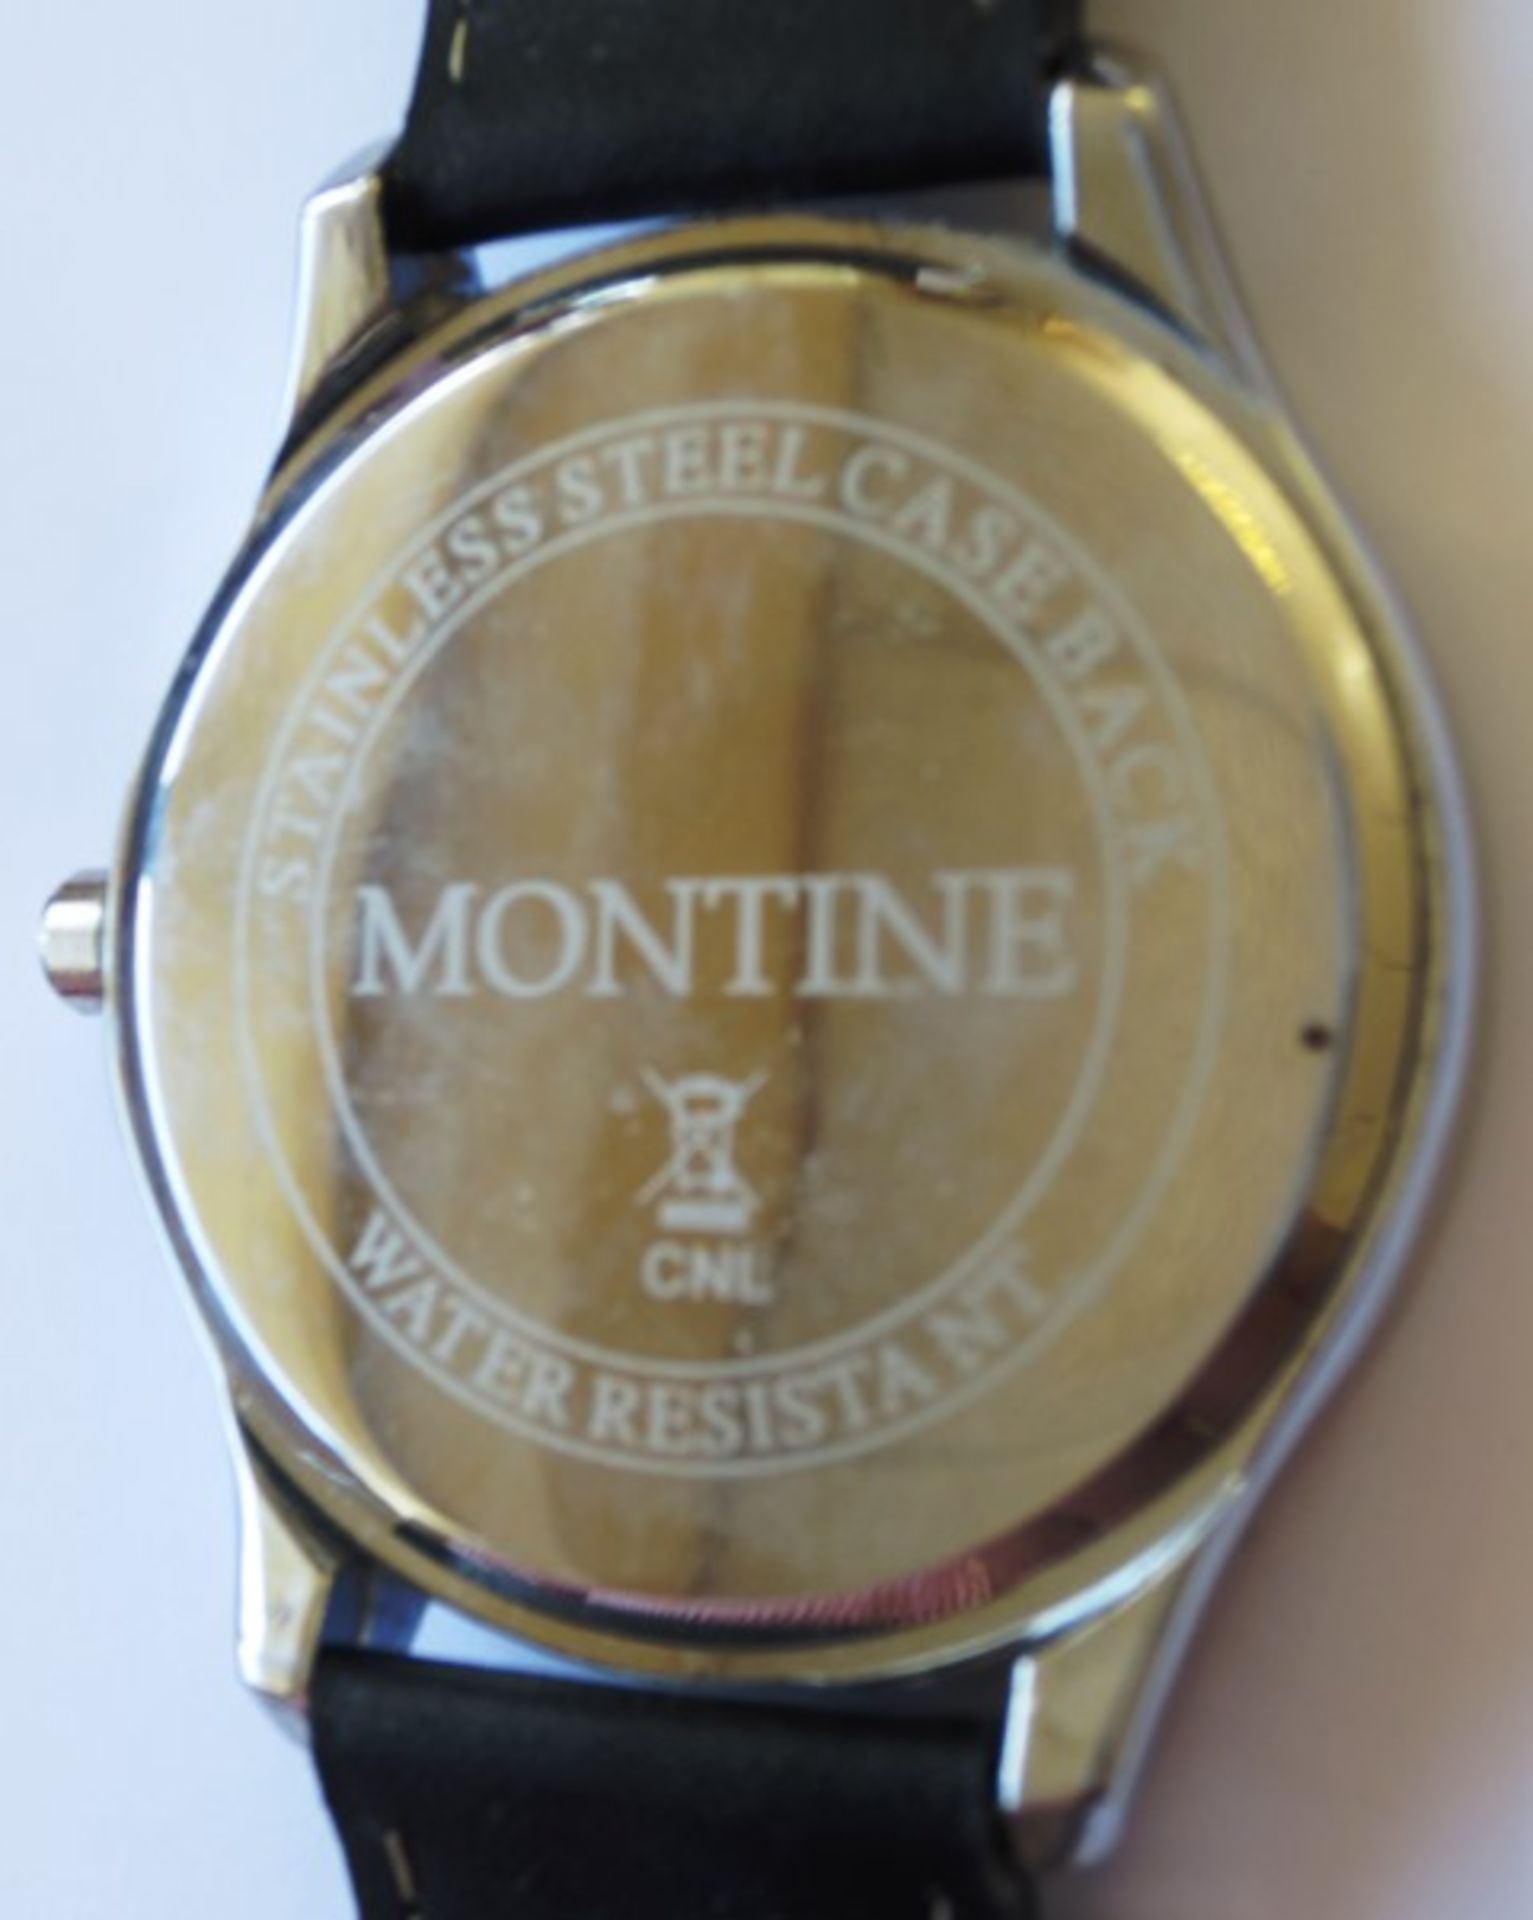 9 carat gold band ring, Montine Quartz watch with stainless steel case back and leather strap... - Image 3 of 9